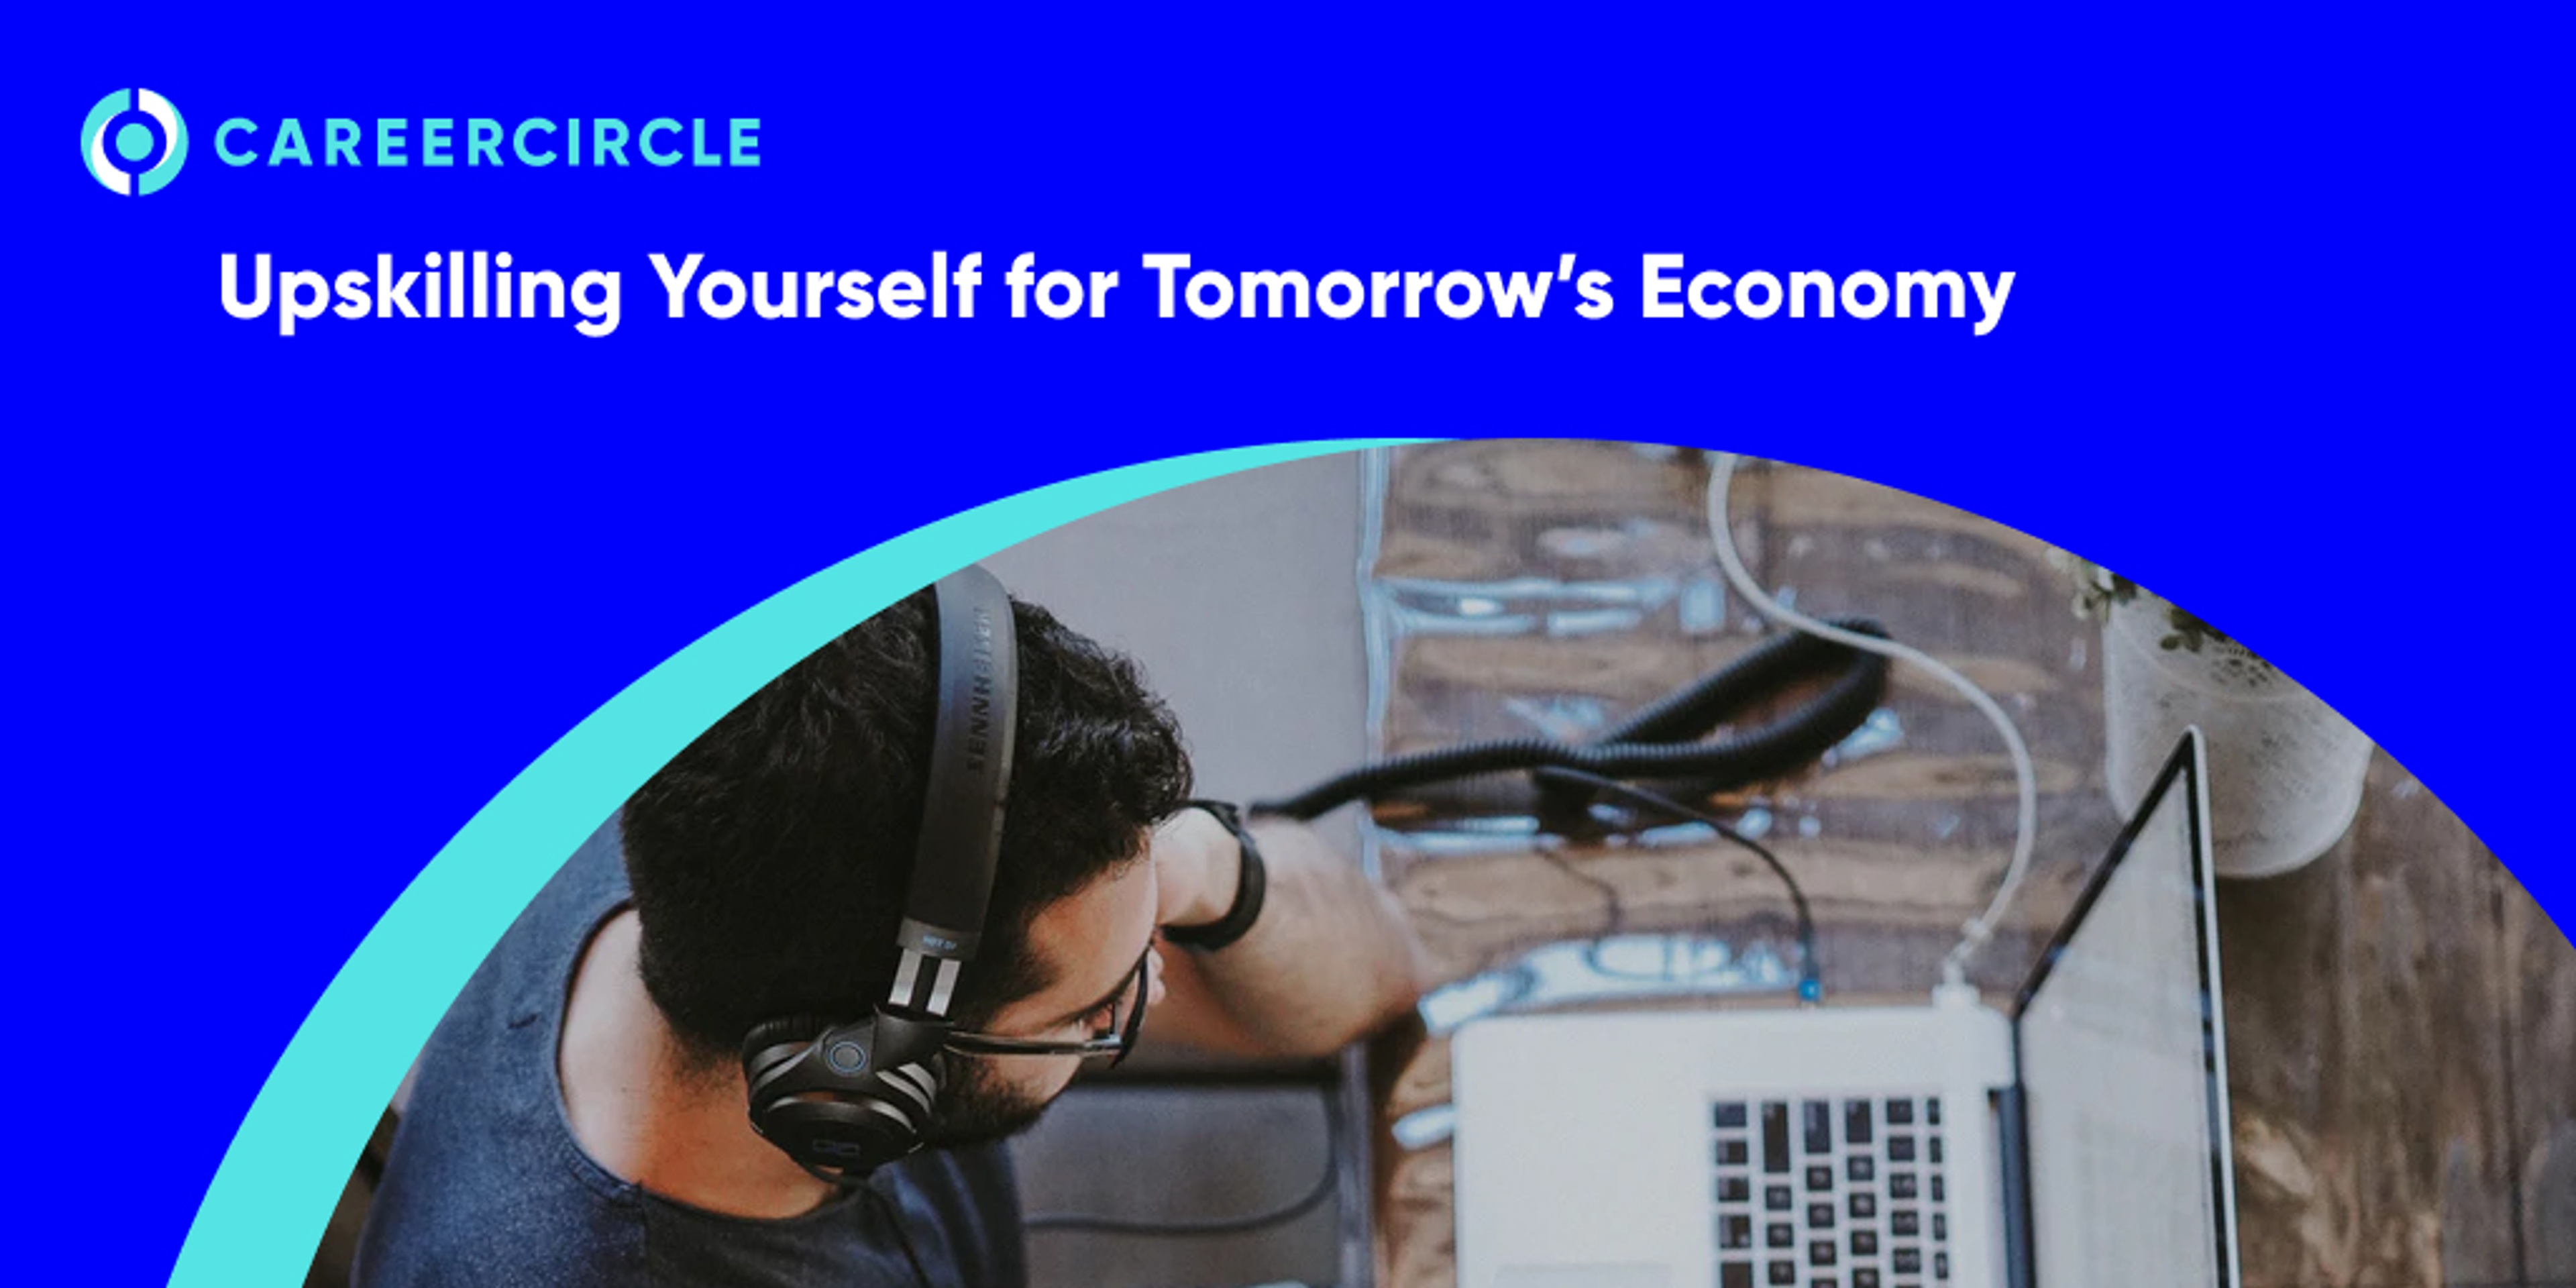 CareerCircle - "Upskilling Yourself for Tomorrow's Economy" image of a man wearing headphones sitting at his computer